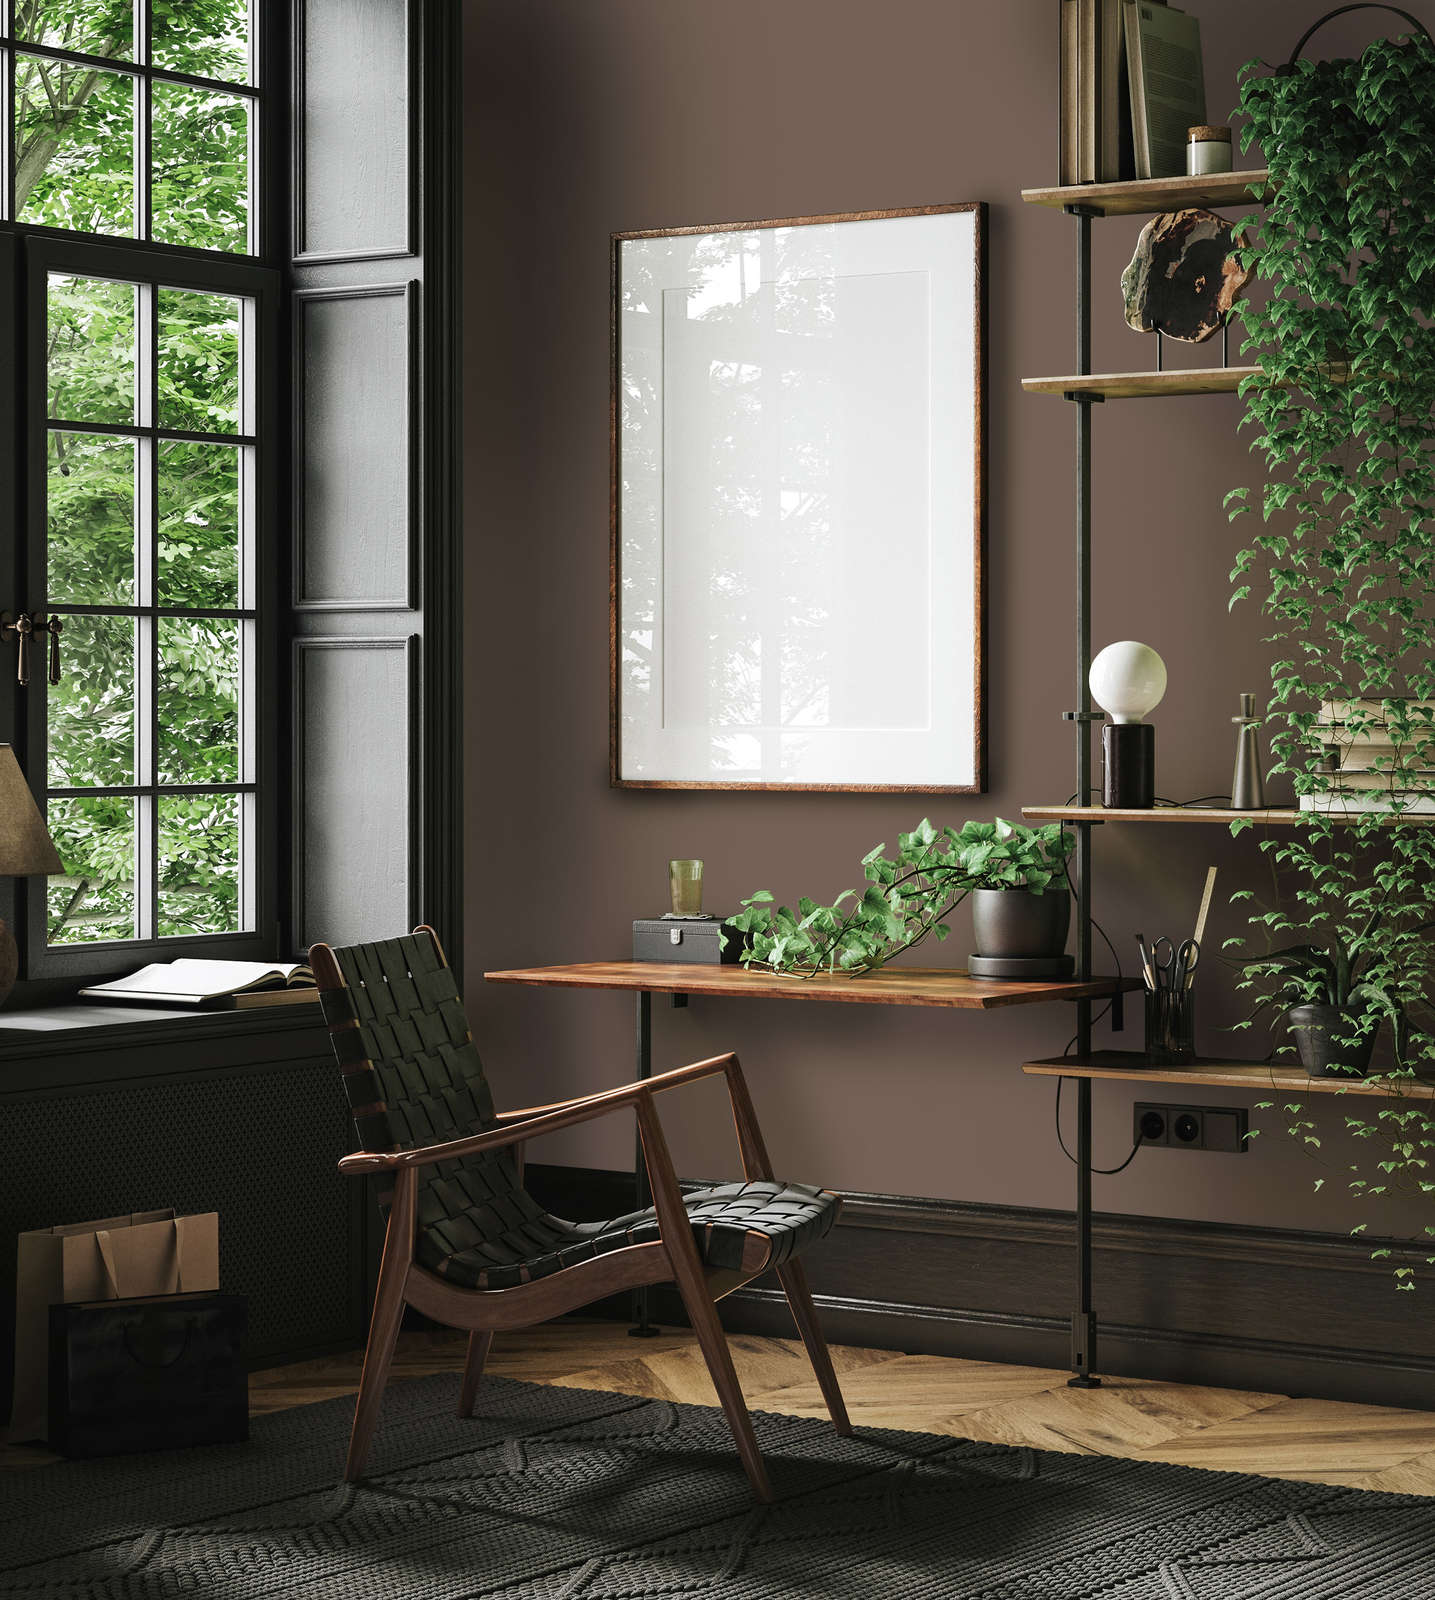             Premium Wall Paint down-to-earth maroon »Modern Mud« NW721 – 1 litre
        